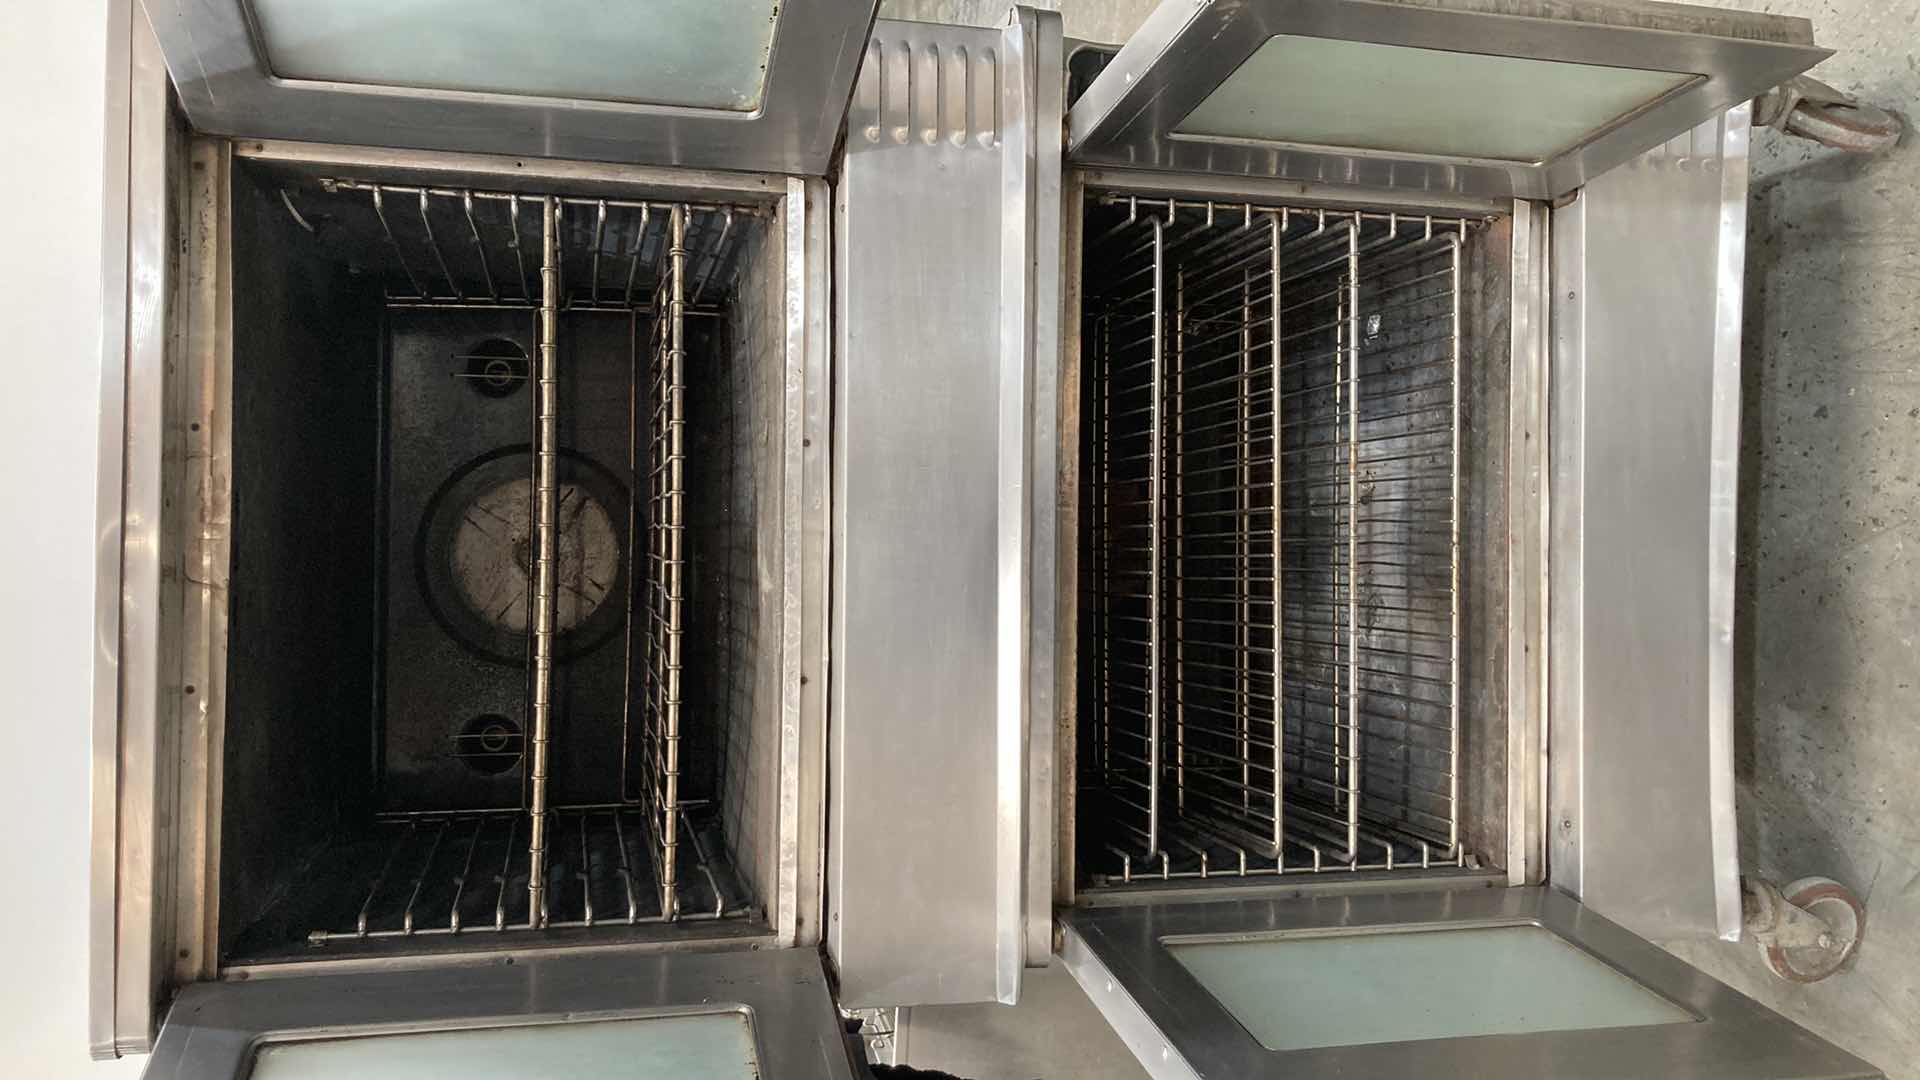 Photo 6 of BLODGETT 2 TIER COMMERCIAL CONVECTION OVEN (ELECTRICAL SHORT)